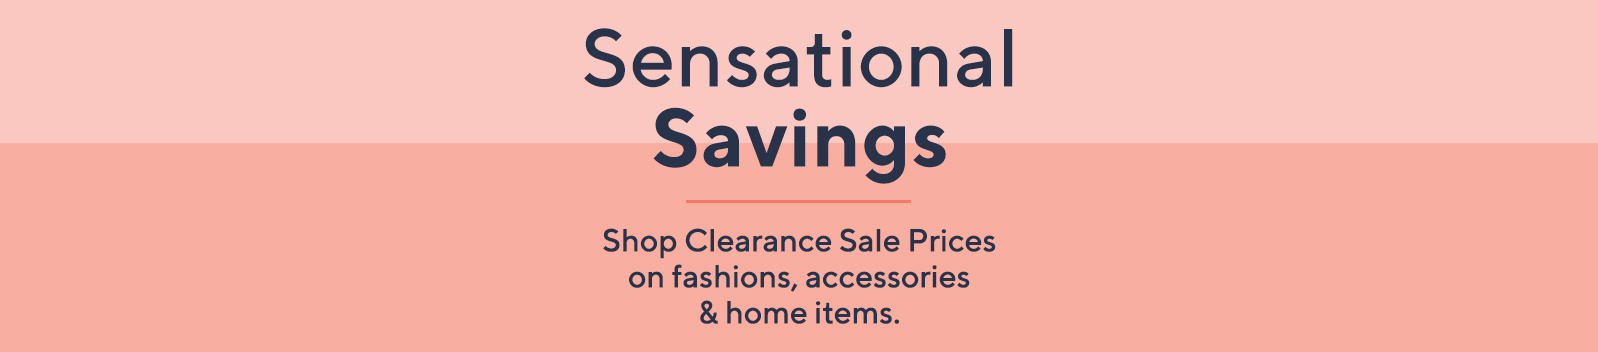 Sensational Savings  Shop Clearance Sale Prices on fashions, accessories & home items.